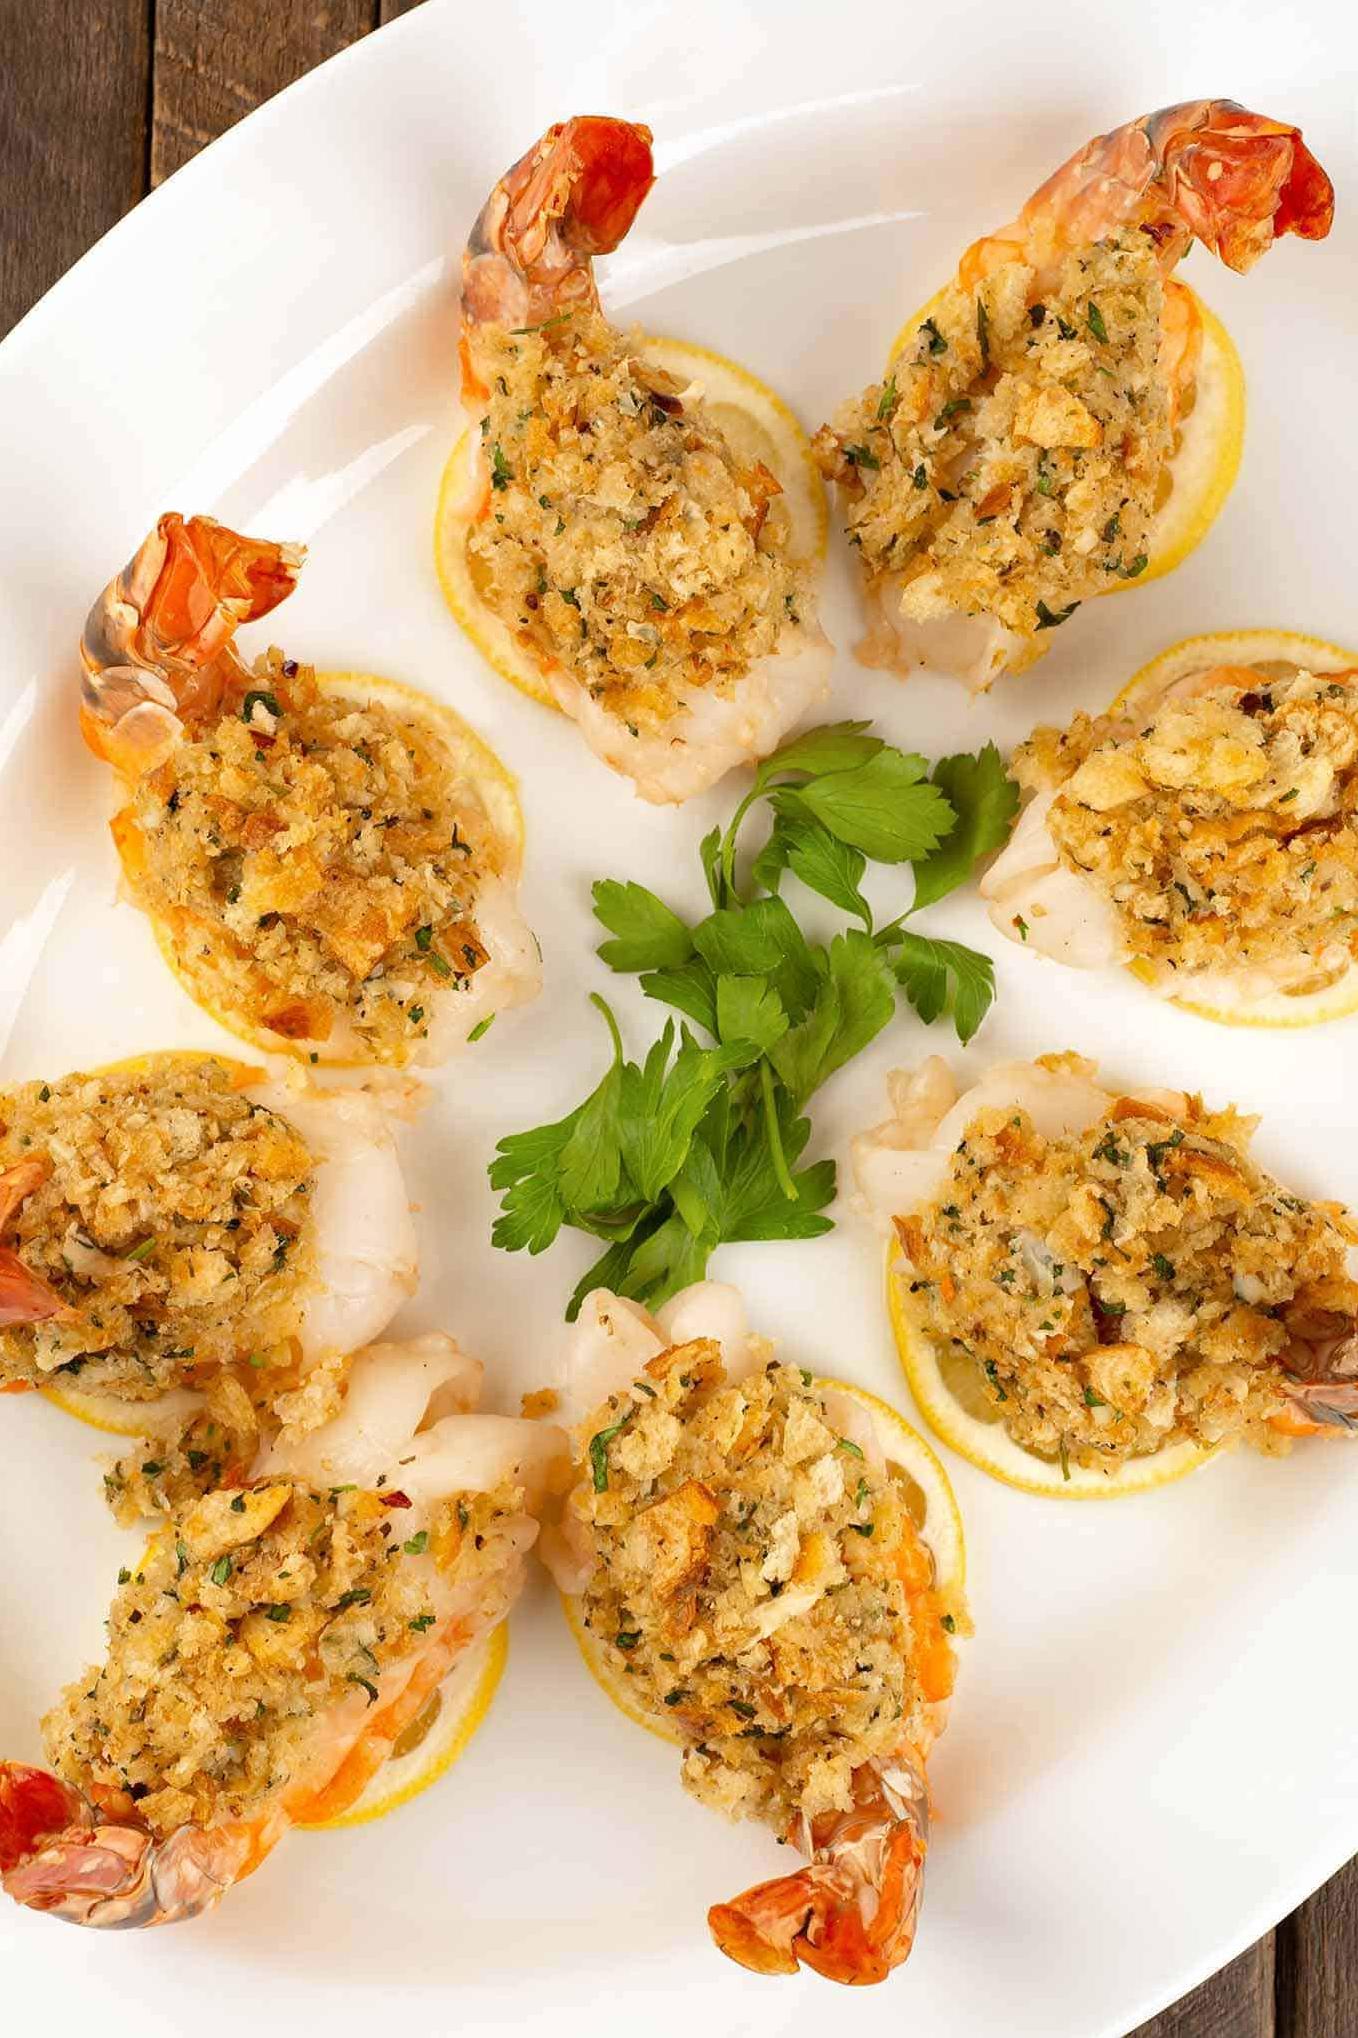  The perfect balance of wine and butter gives this shrimp dish a rich and sophisticated taste.